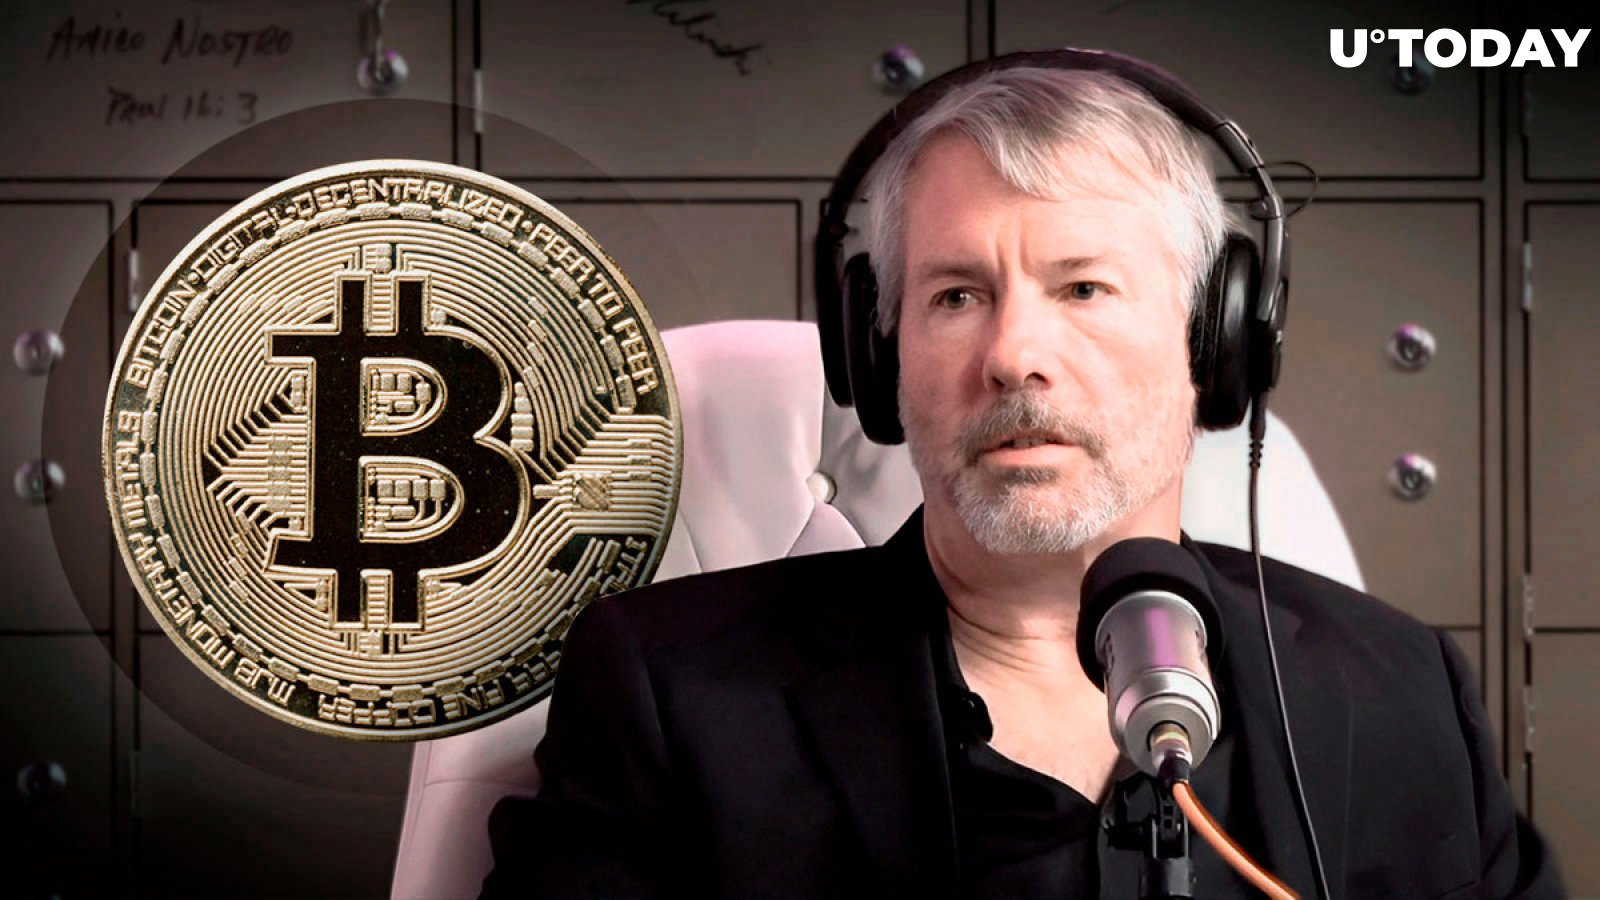 Michael Saylor Breaks Silence on Bitcoin's Store-of-Value Qualities